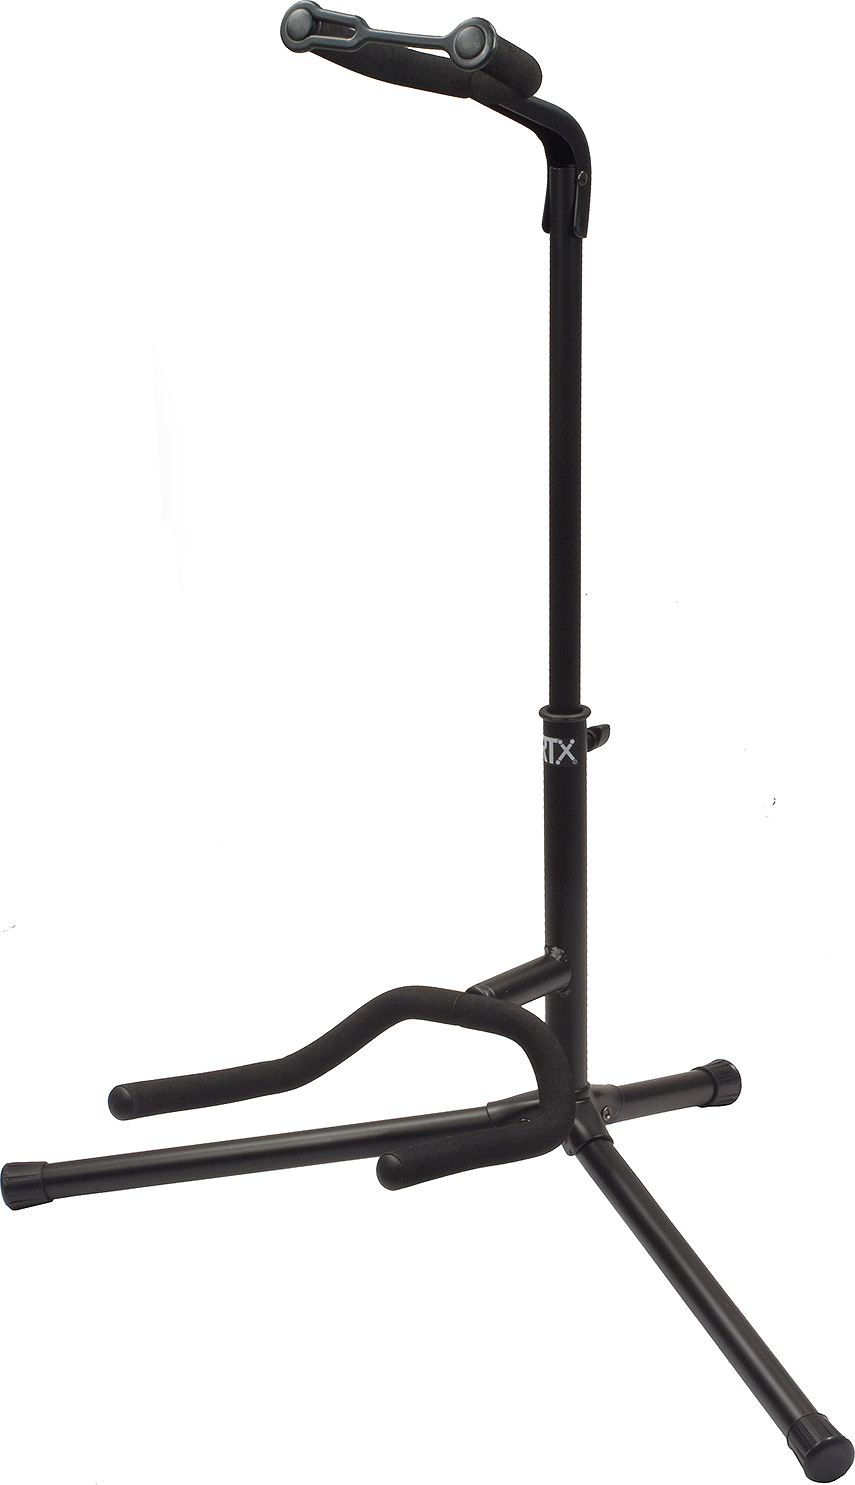 Rtx G1nx Stand Guitare Universel TÊte Pliable - Noir - Stand for guitar & bass - Main picture